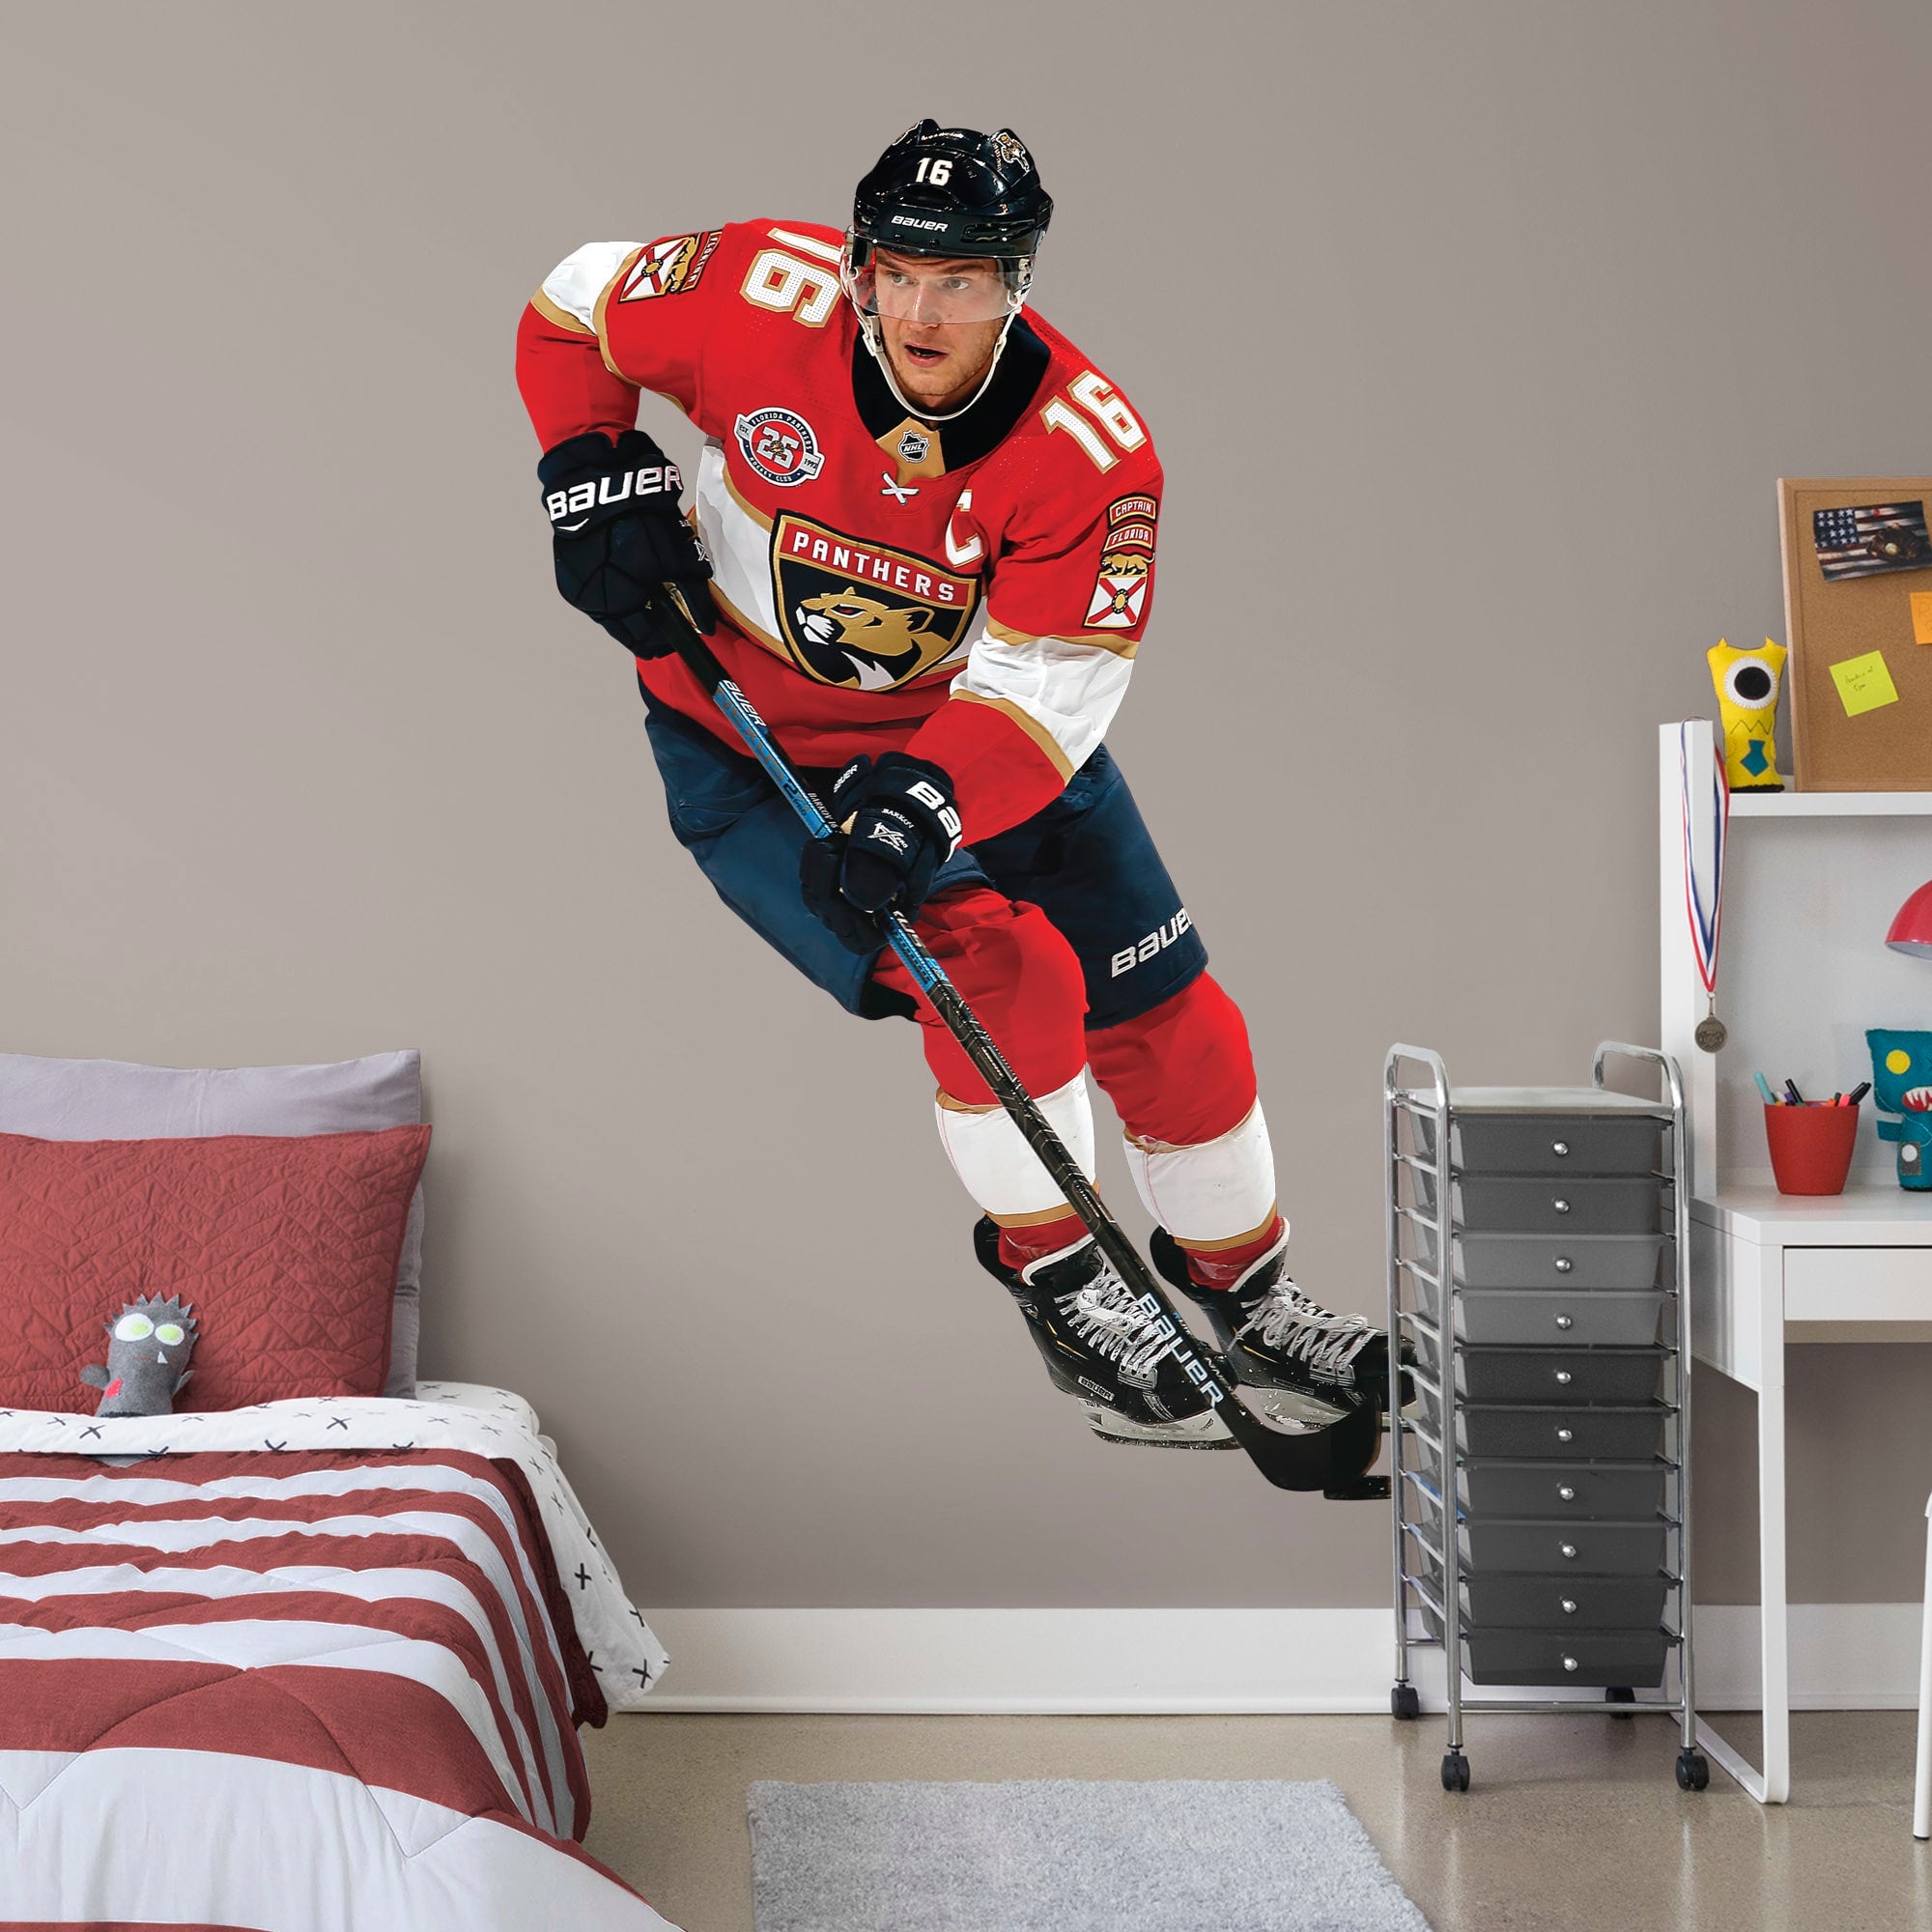 Aleksander Barkov for Florida Panthers - Officially Licensed NHL Removable Wall Decal Life-Size Athlete + 2 Team Decals (51"W x